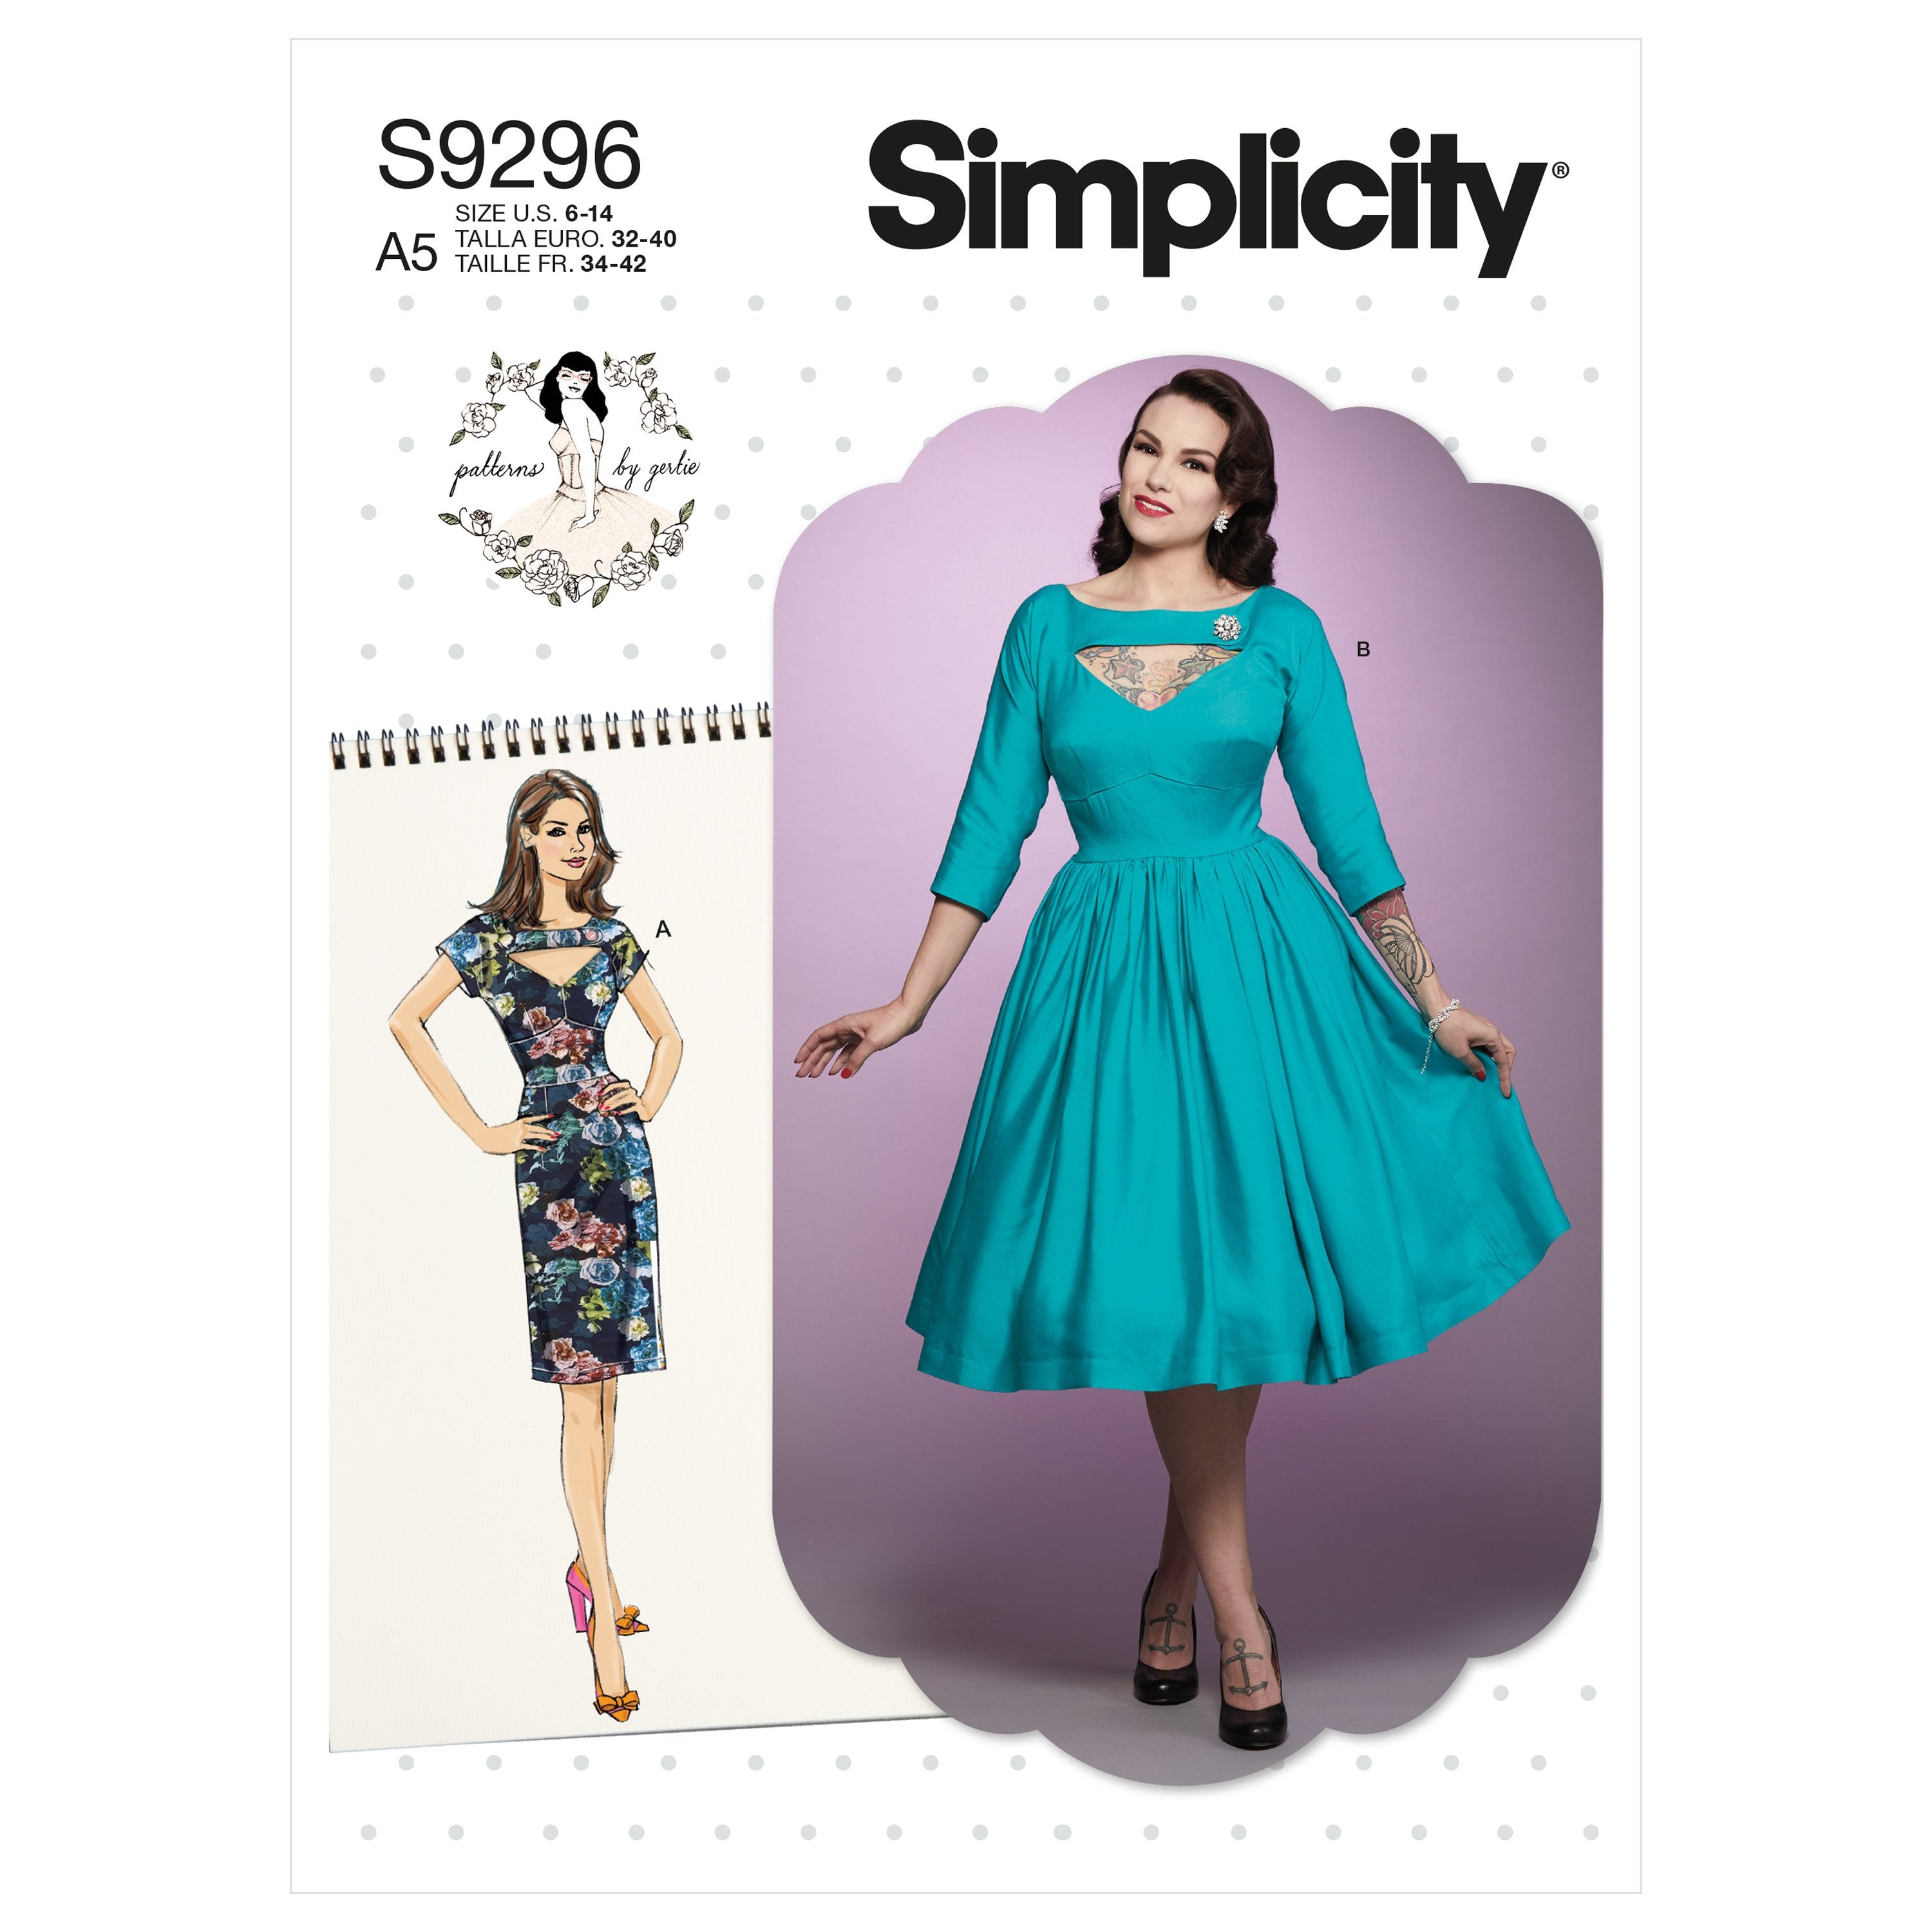 Simplicity 1950's Sewing Pattern 9296 Vintage Dress from Jaycotts Sewing Supplies